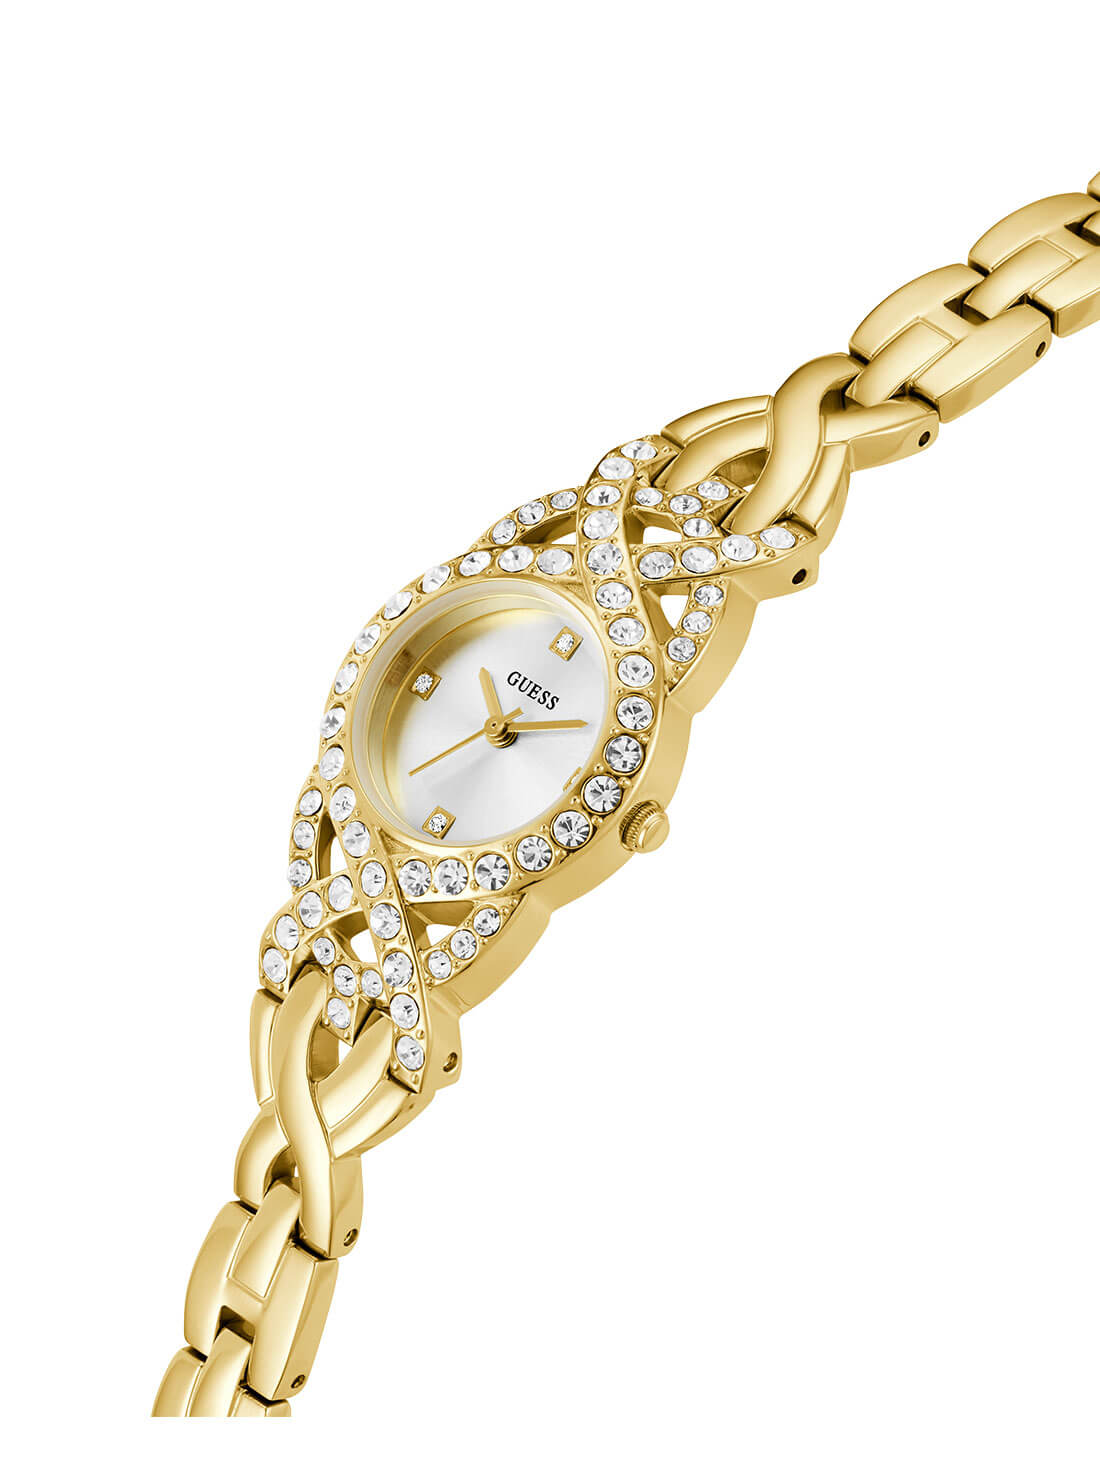 GUESS Gold Adorn Crystal Watch side view